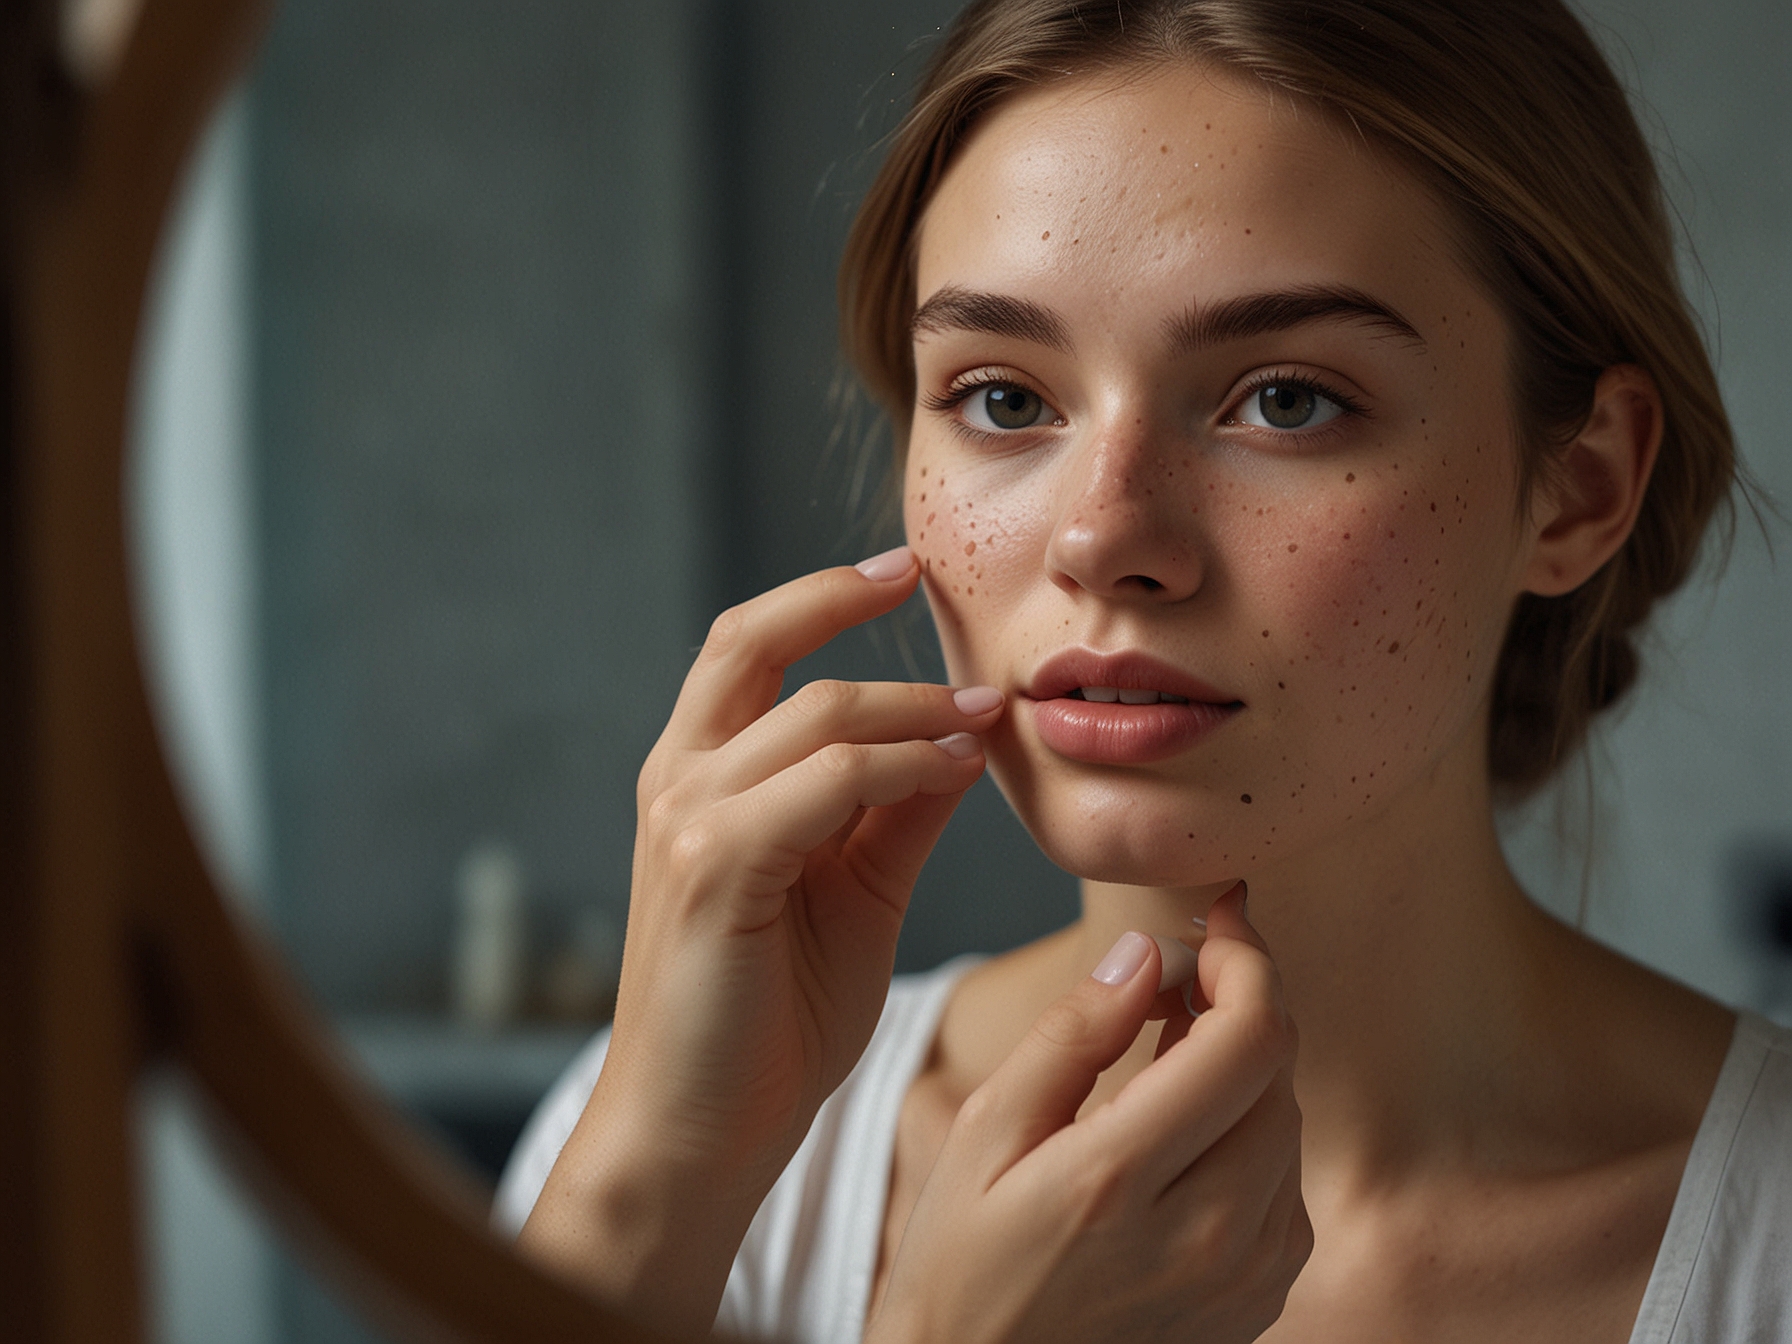 A young woman applies a small, round pimple patch to her face in front of a mirror. The image highlights the patch's subtle appearance and the simple, easy application process.